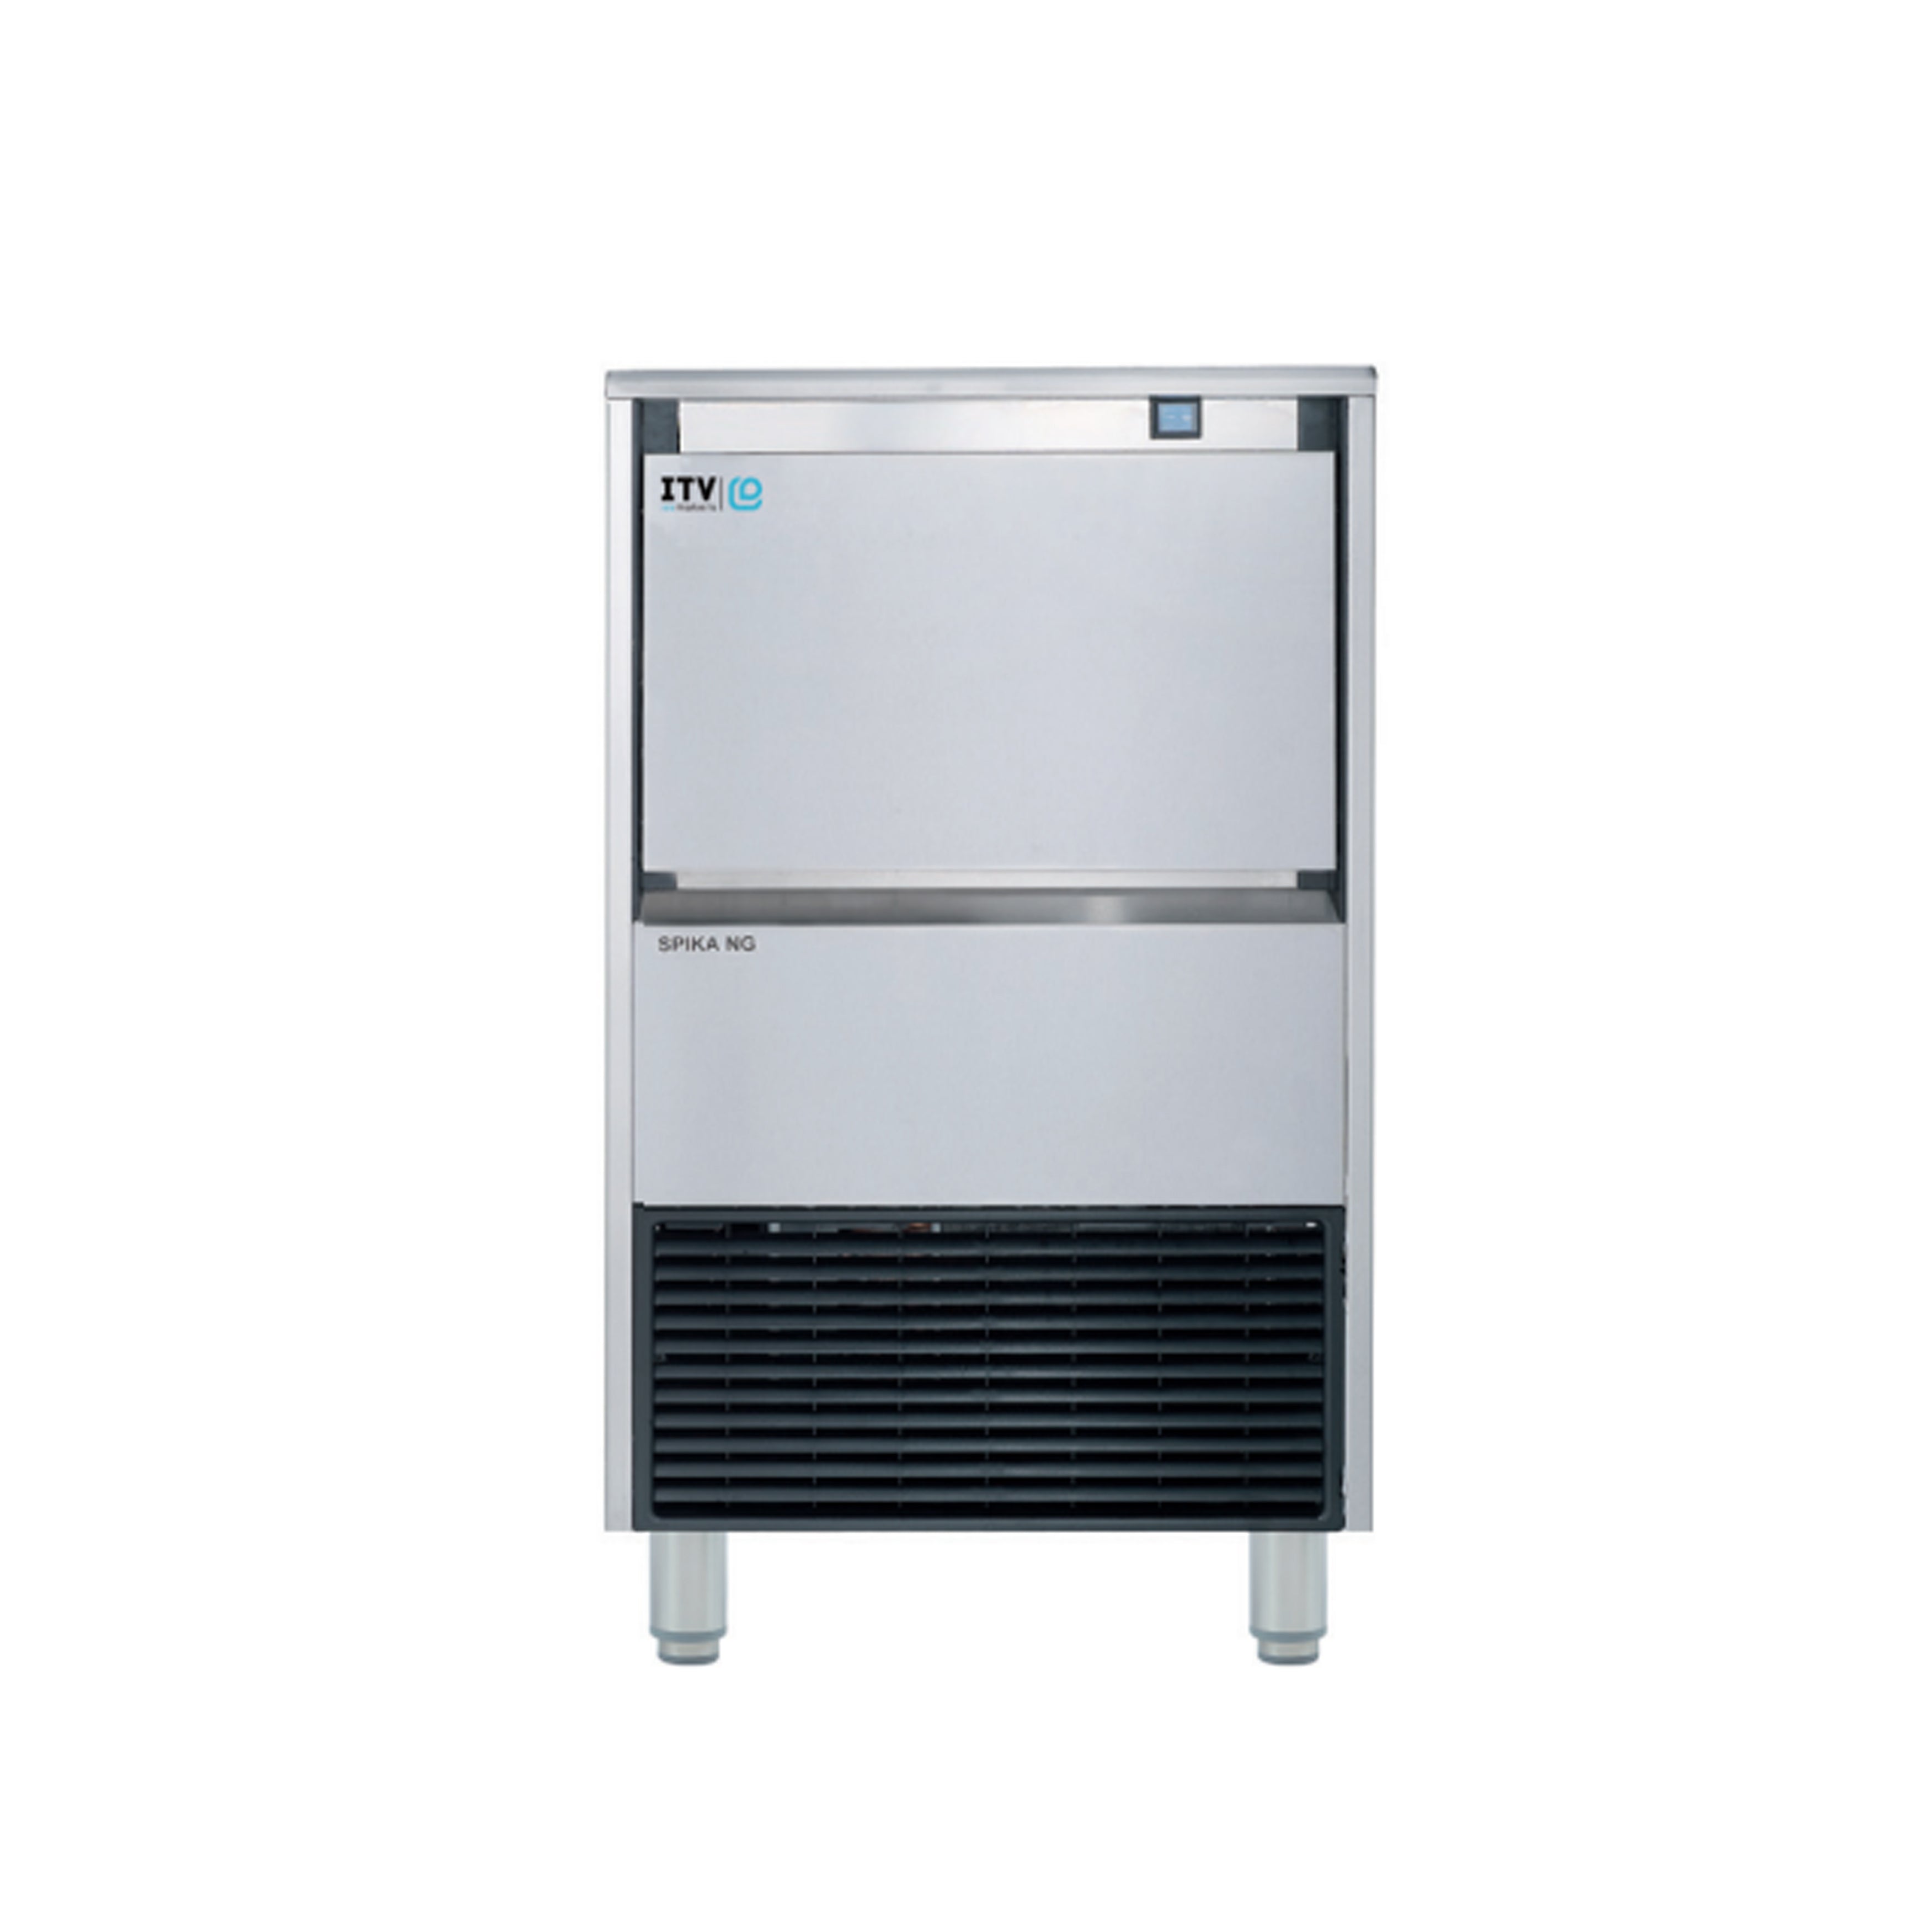 ITV - SPIKA NG 160W, Commercial Spika Cubers under-counter Ice Maker Self-Contained Ice Cube Machine 152lbs